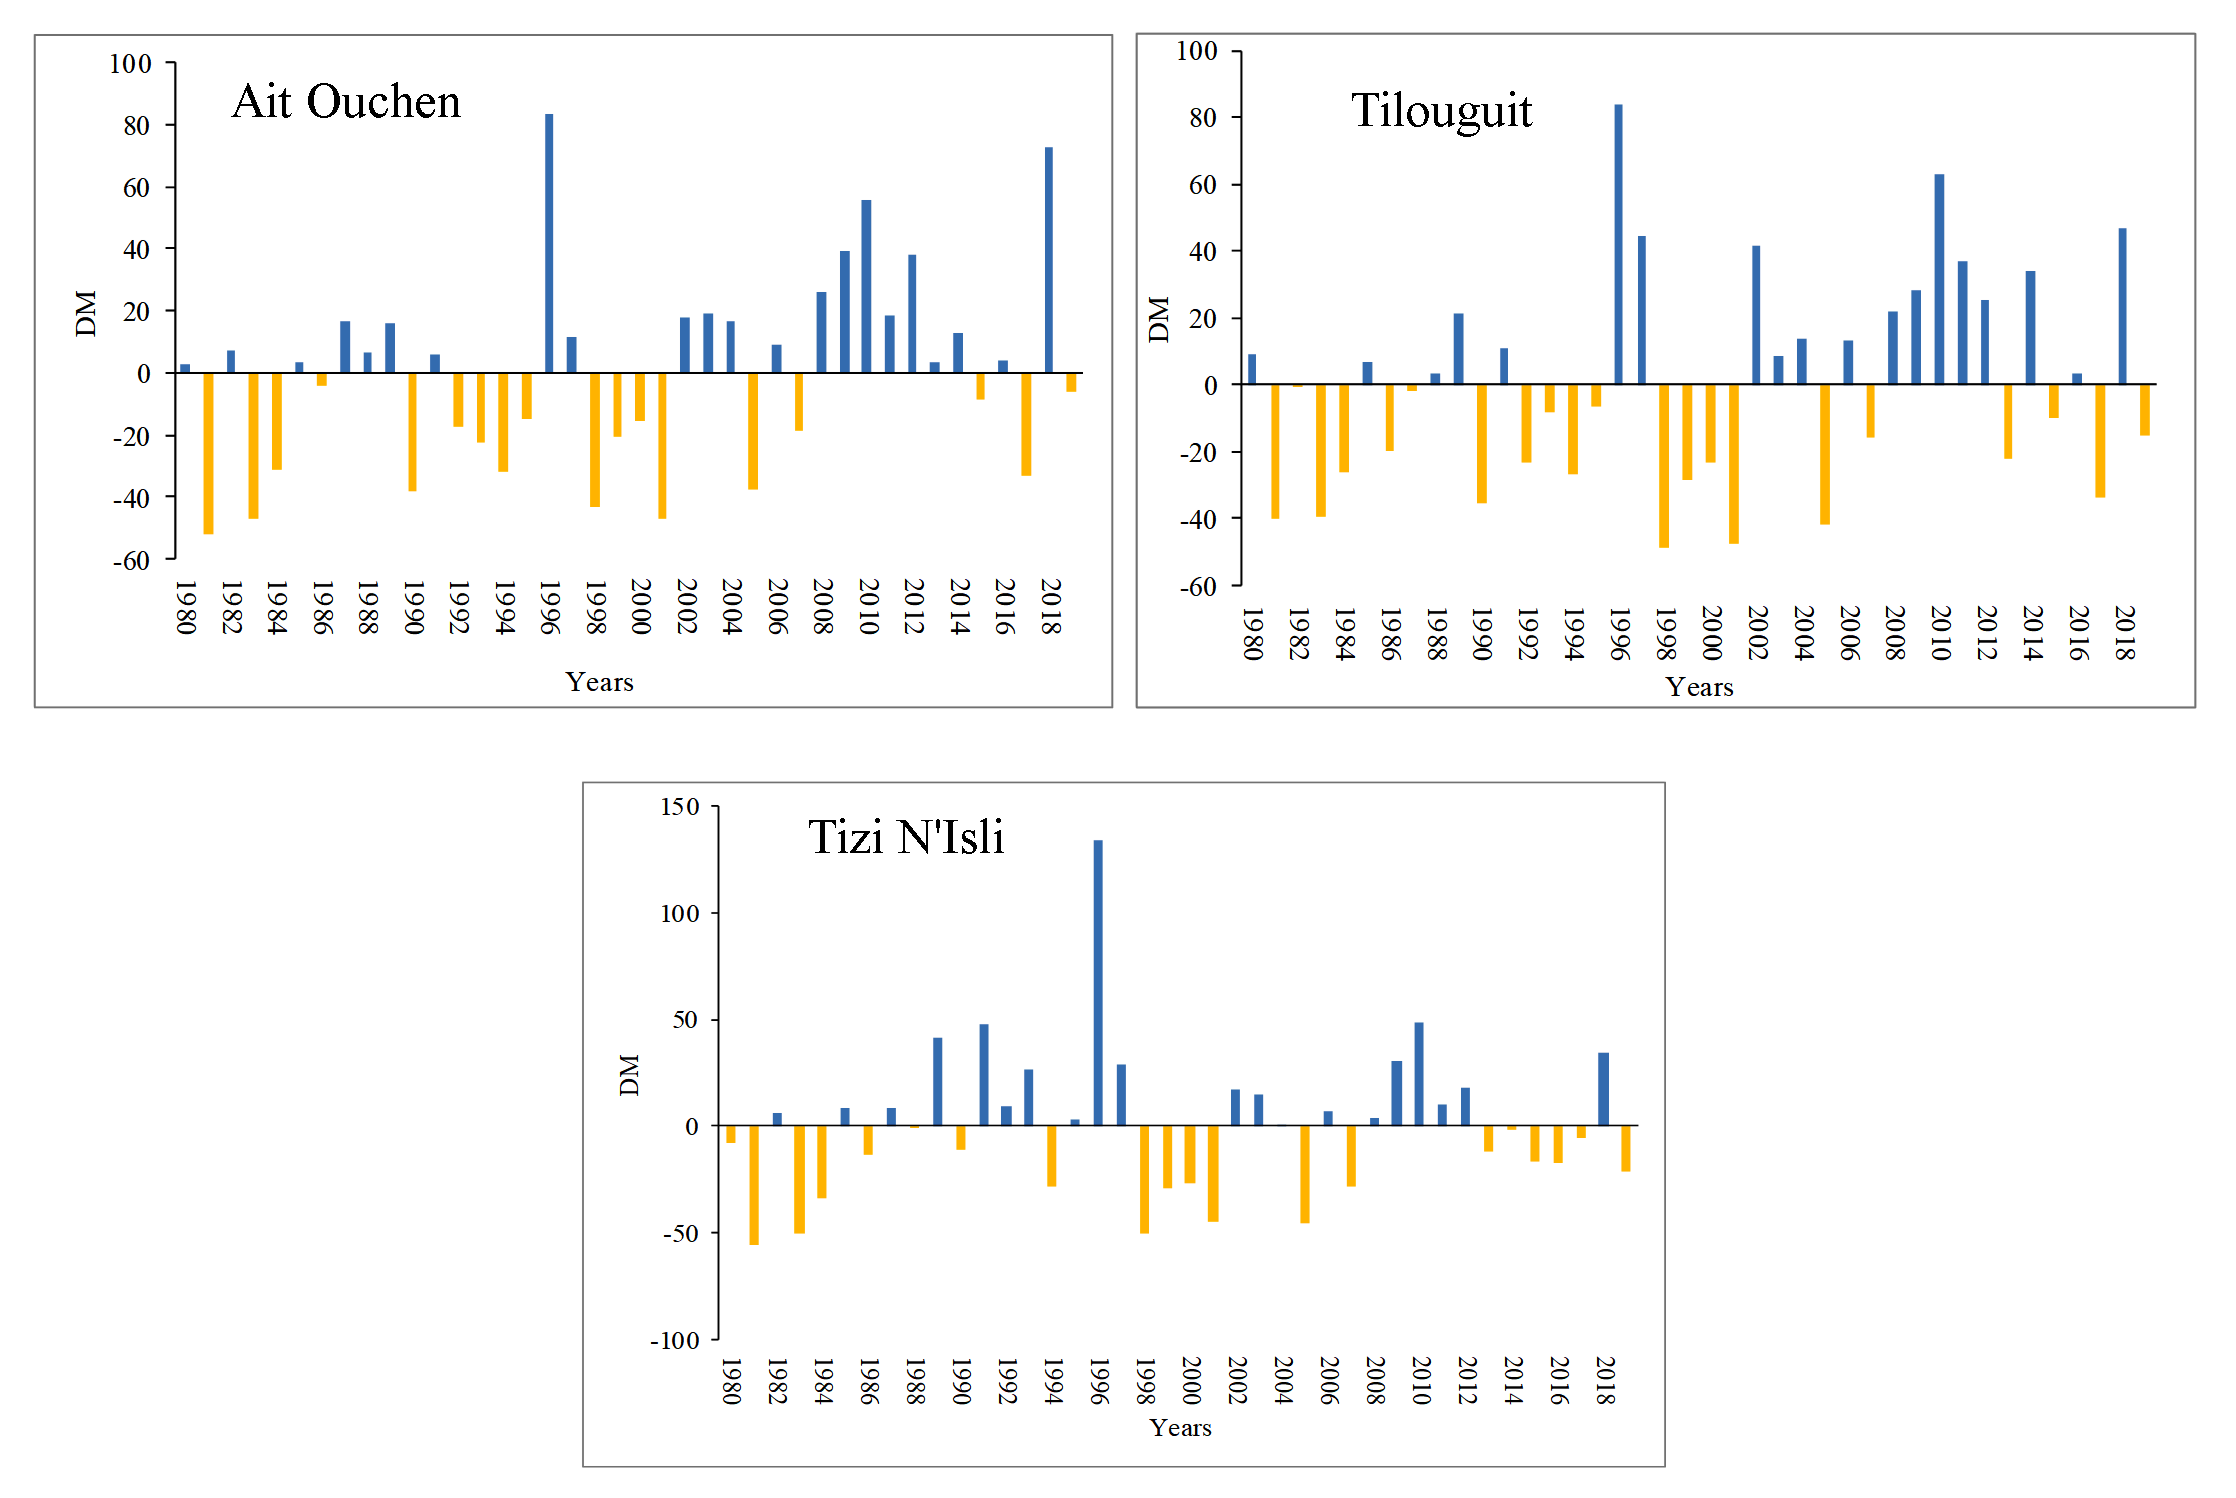 Characterization and Quantification of Meteorological Drought in the Oued El-Abid Watershed, Central High Atlas, Morocco (1980-2019)